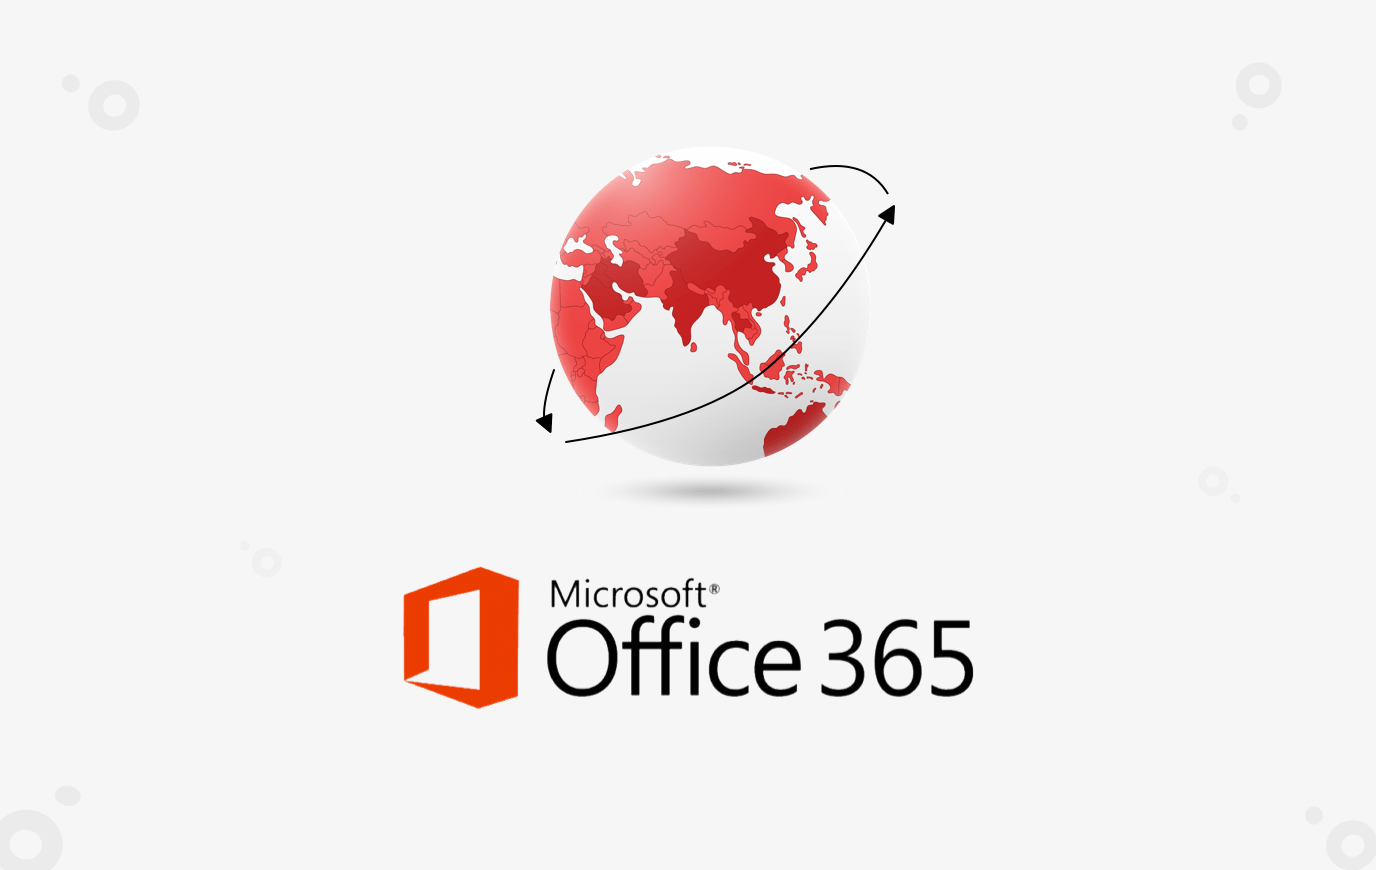 How to Communicate Better when Everyone Works Remote using Office 365